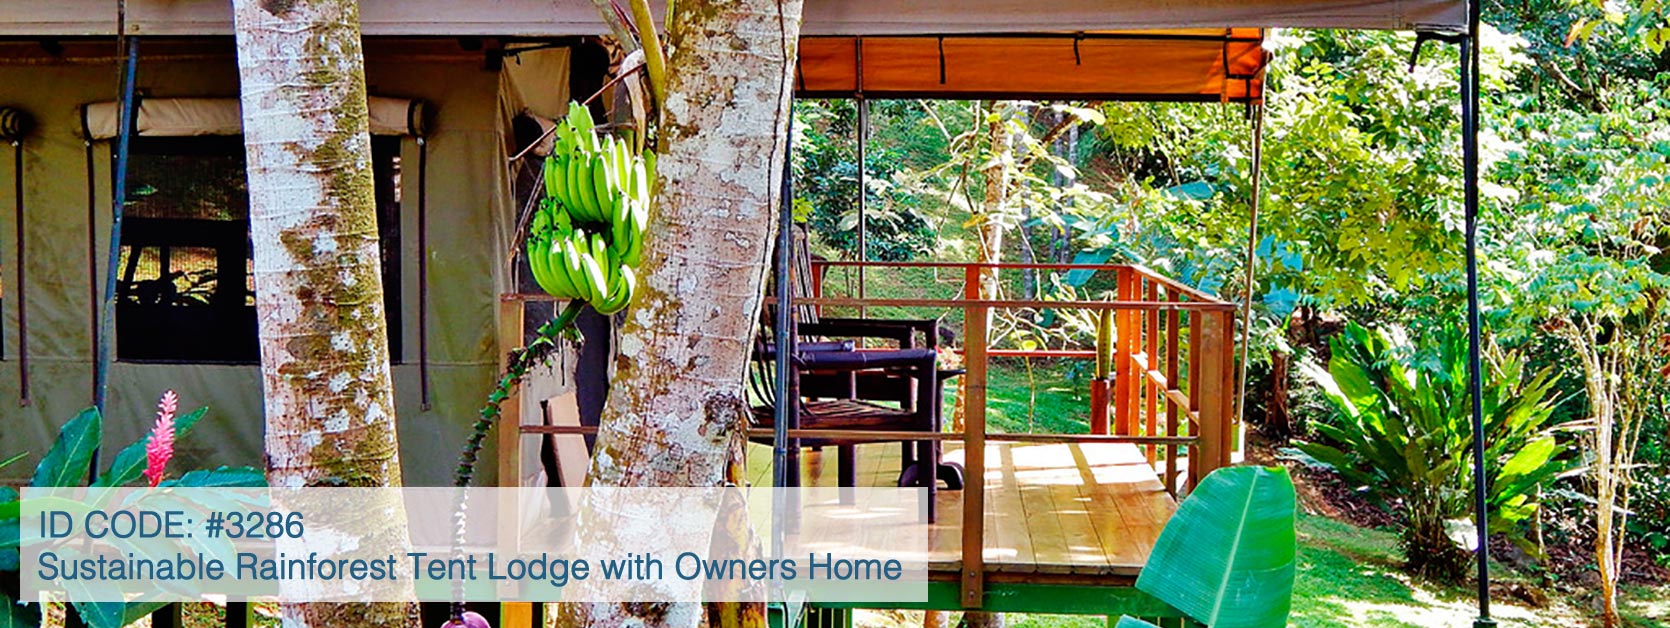 Sustainable Rainforest Tent Lodge with Owners Home, River frontage and Waterfalls!